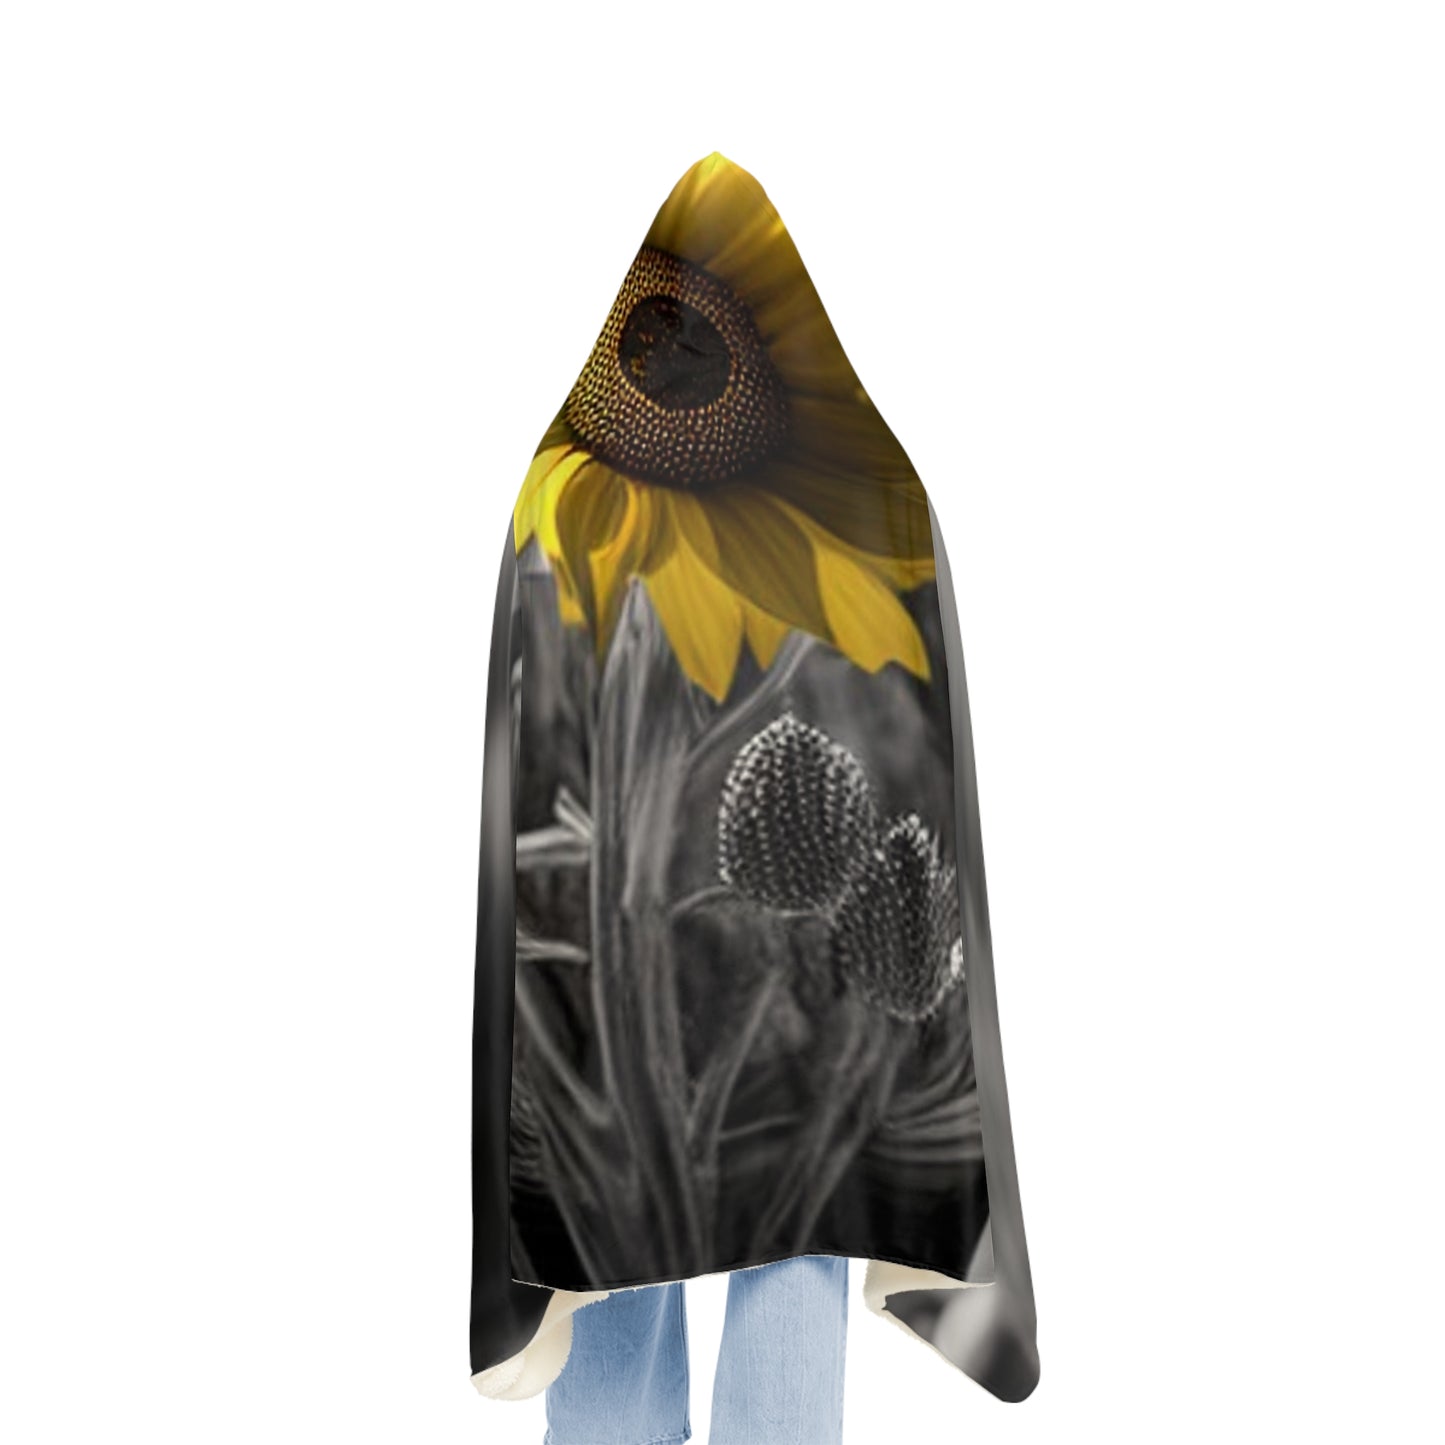 Snuggle Hooded Blanket Yellw Sunflower in a vase 3